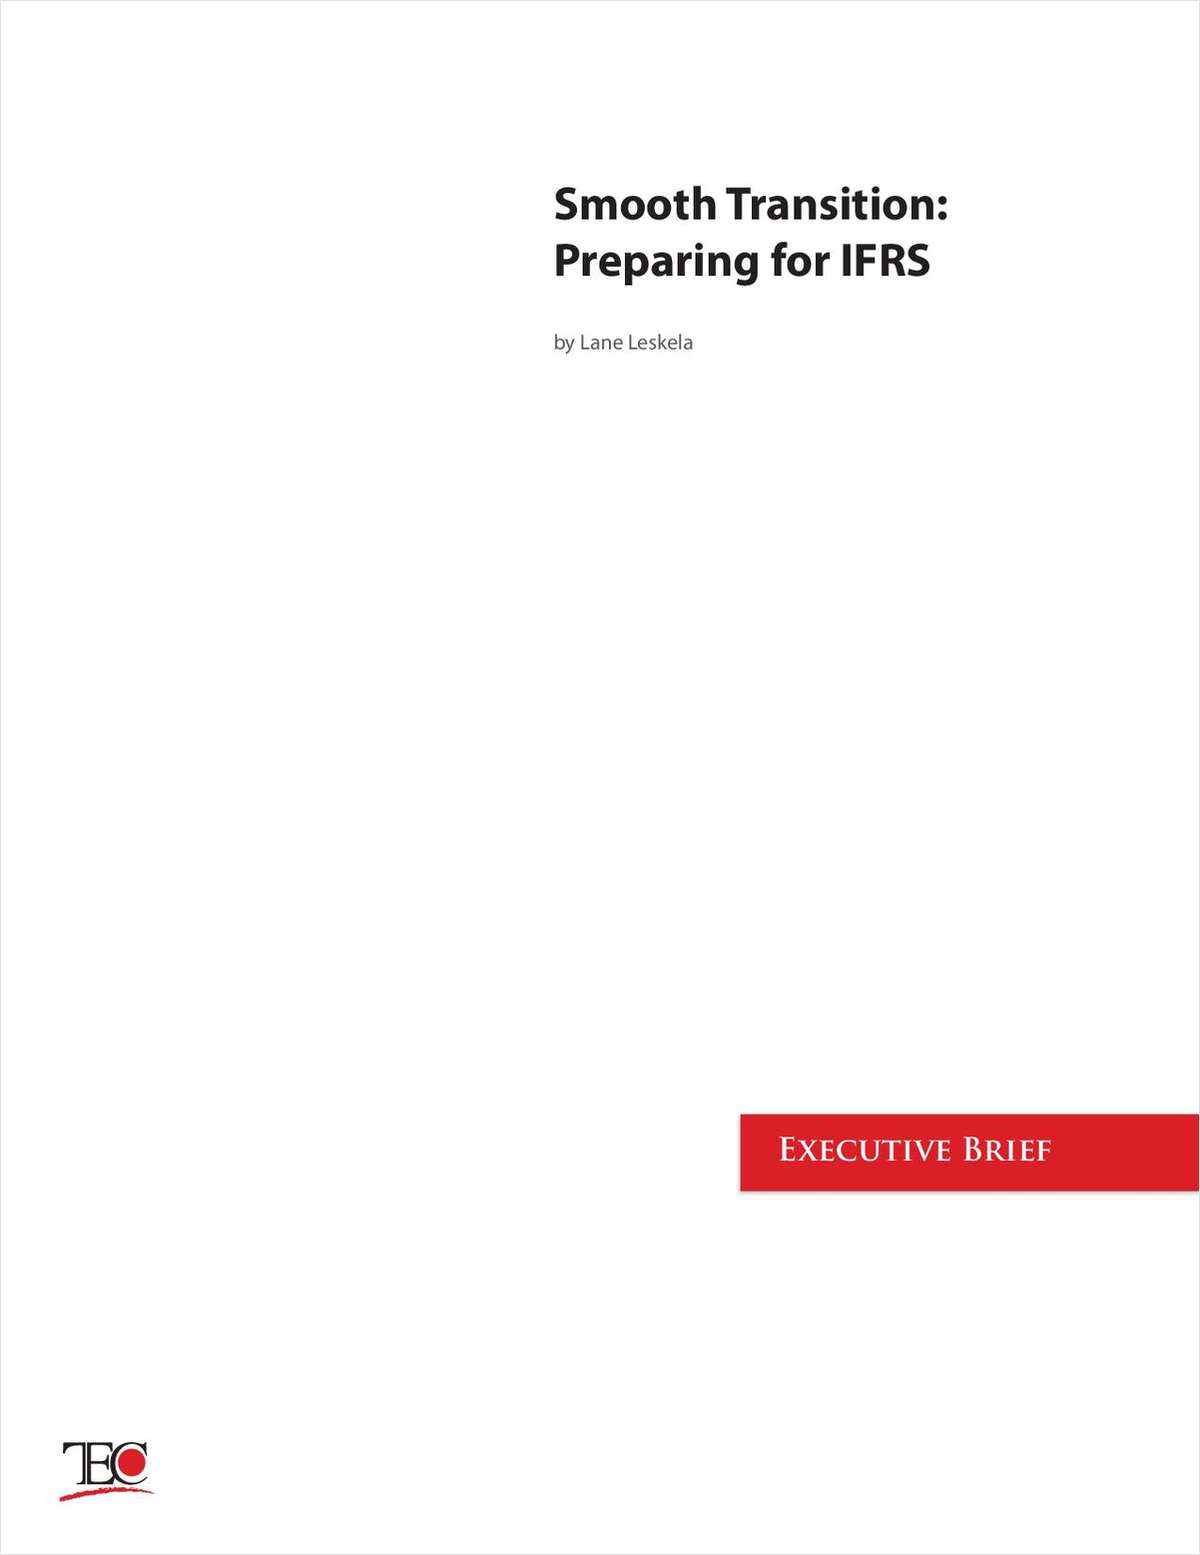 Smooth Transition: Preparing for IFRS